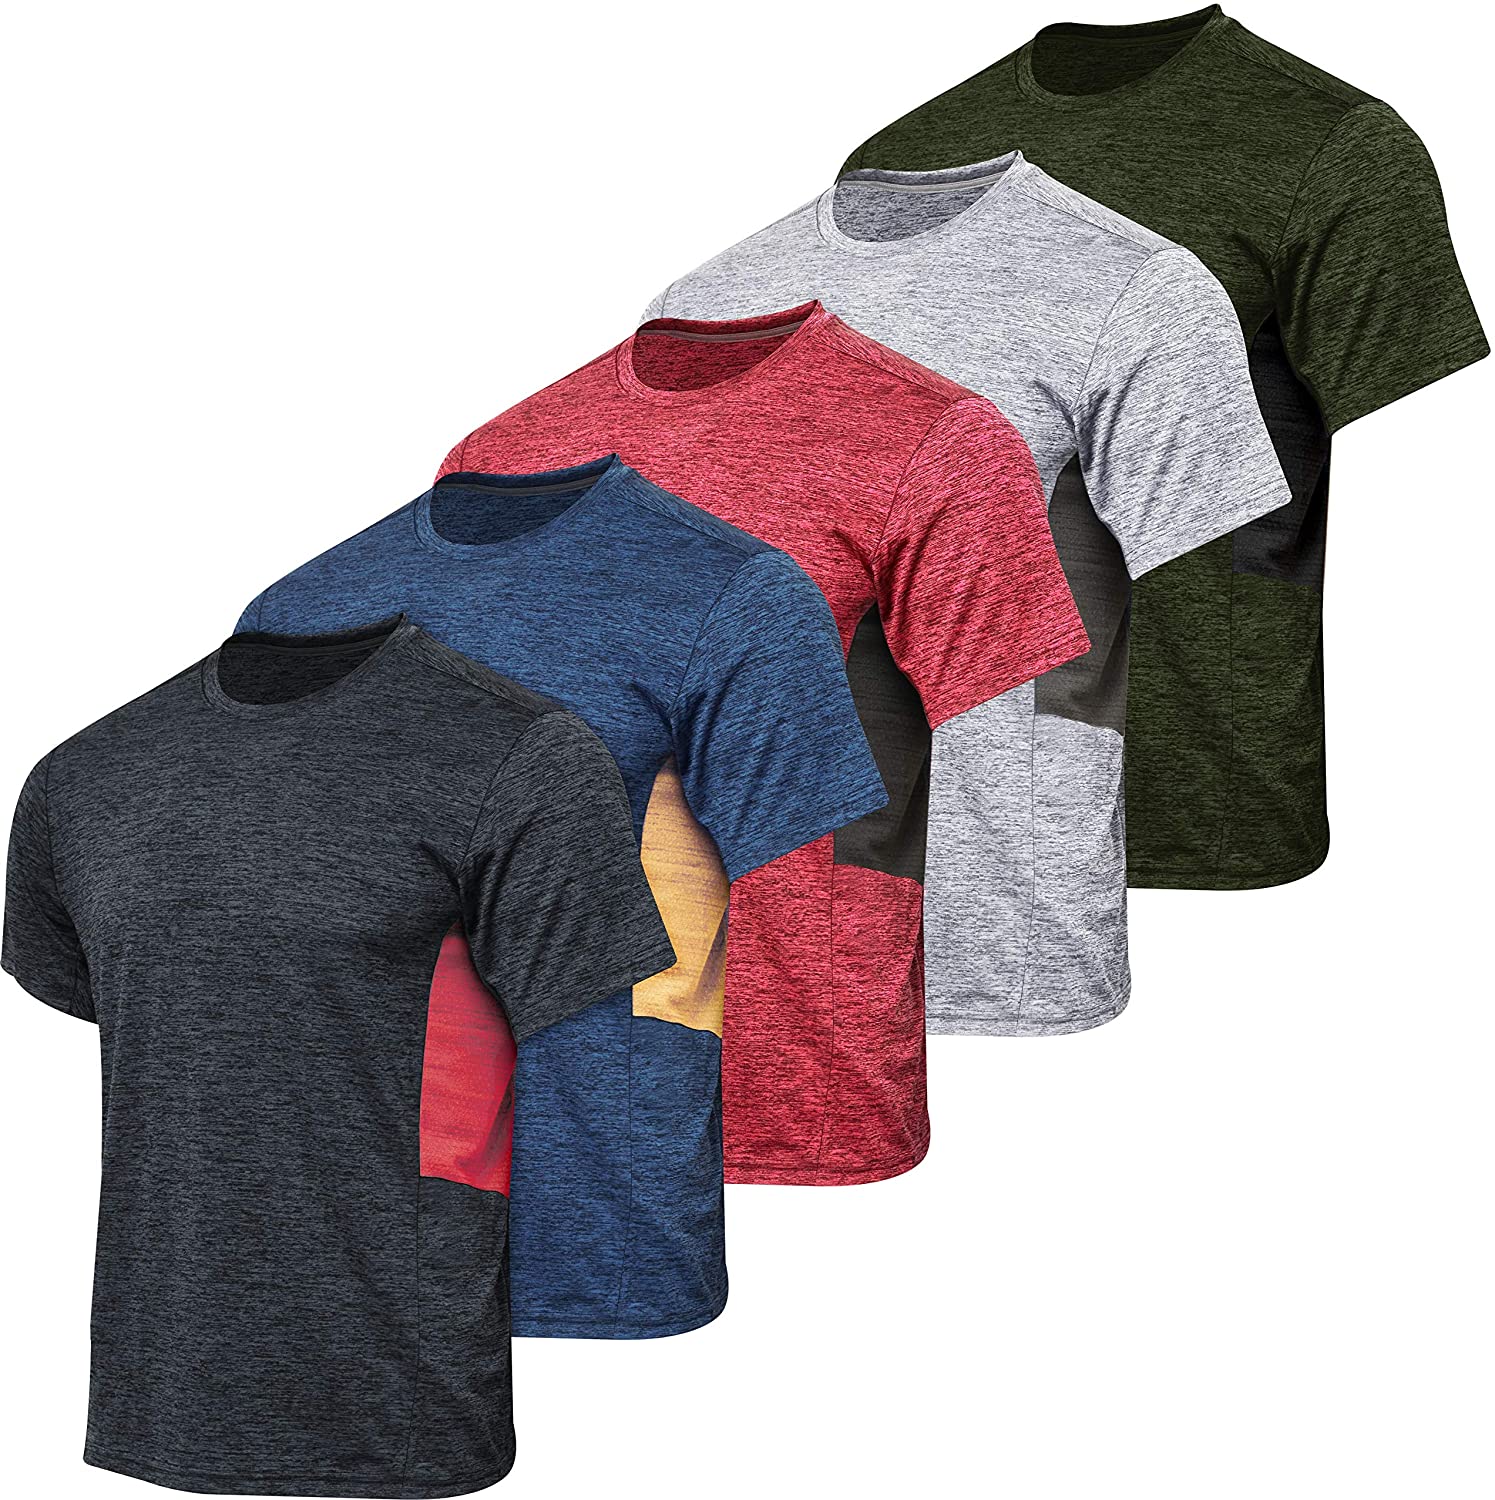 5 Pack: Men’s Dry-Fit Moisture Wicking Active Athletic Performance Crew ...